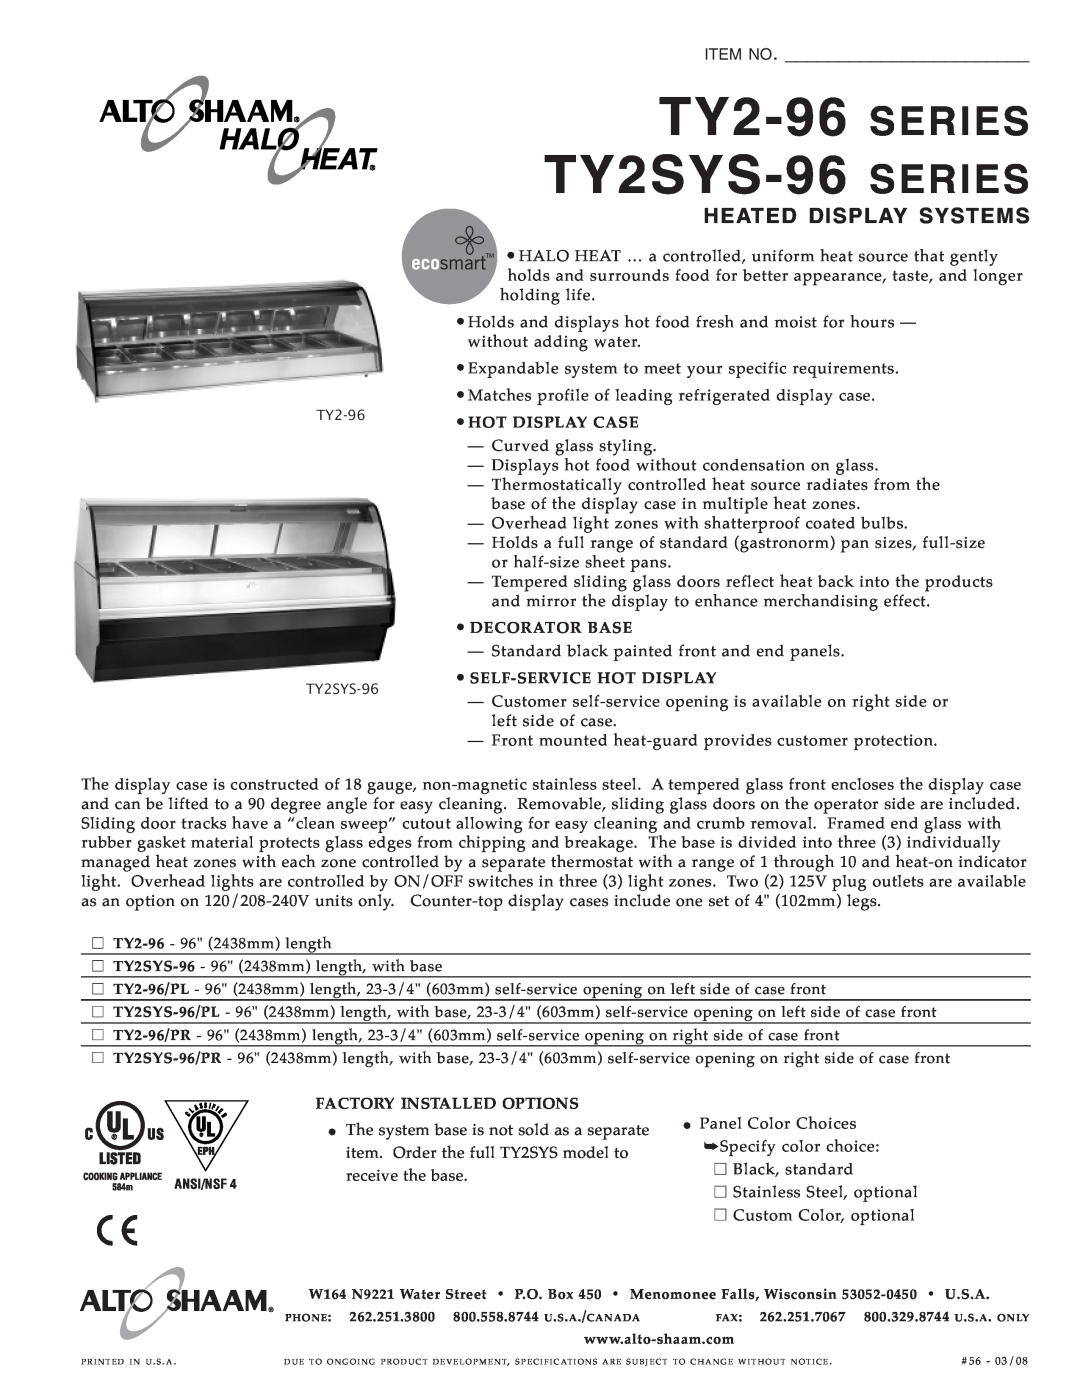 Alto-Shaam TY2SYS-96 specifications TY2-96 SERIES TY2S YS-96 SERIES, Item No, Heated Display Syste Ms 